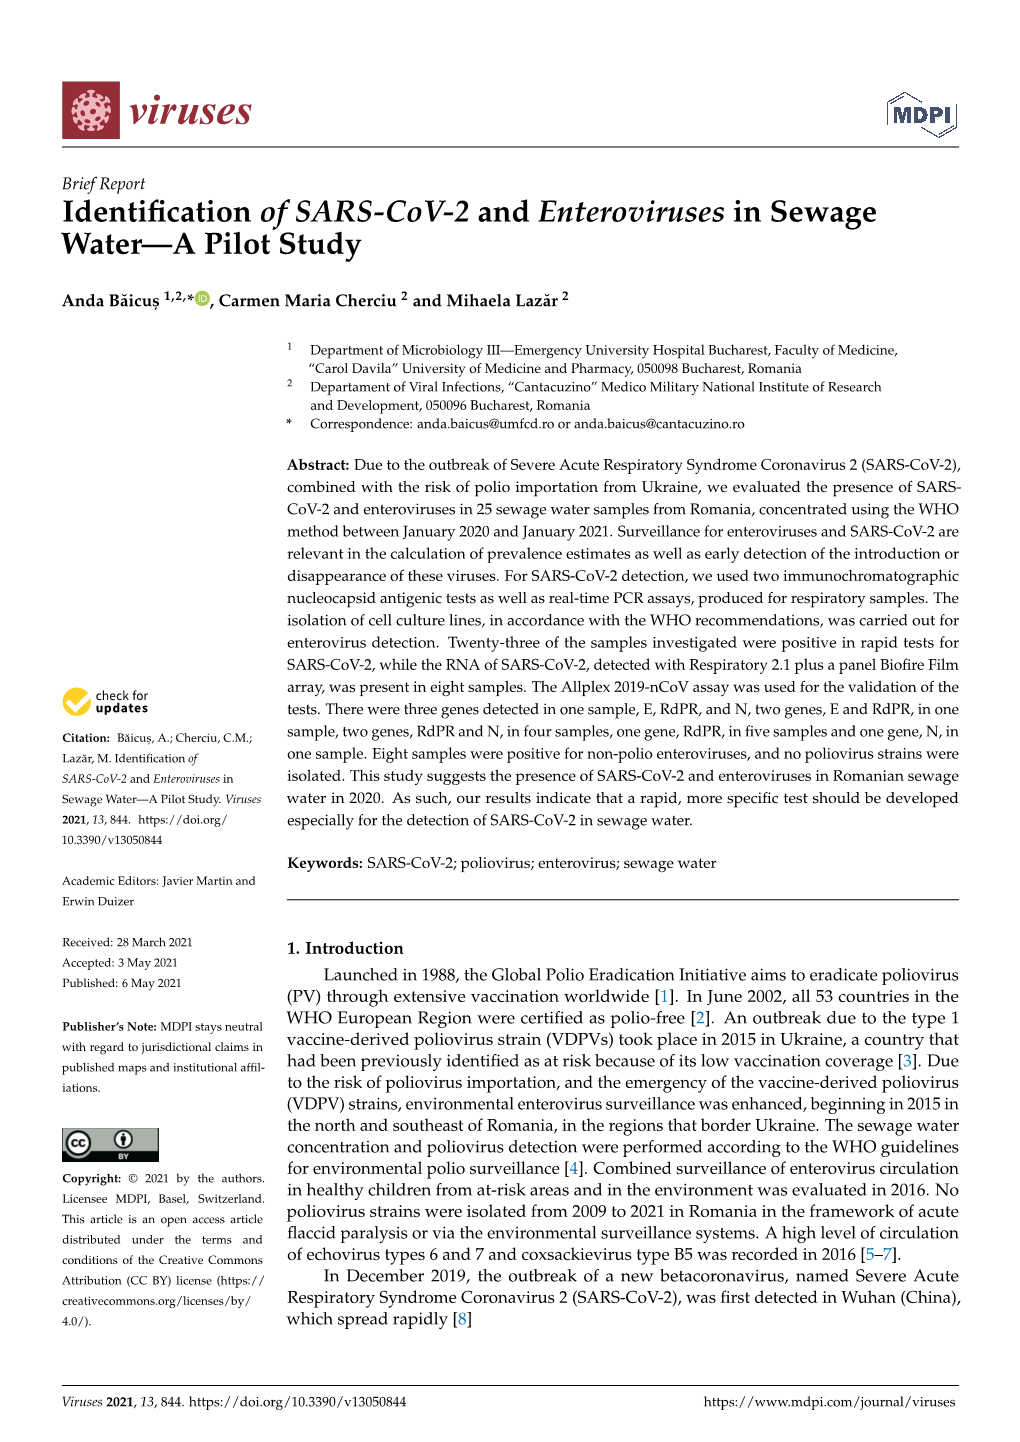 Identification of SARS-Cov-2 and Enteroviruses in Sewage Water—A